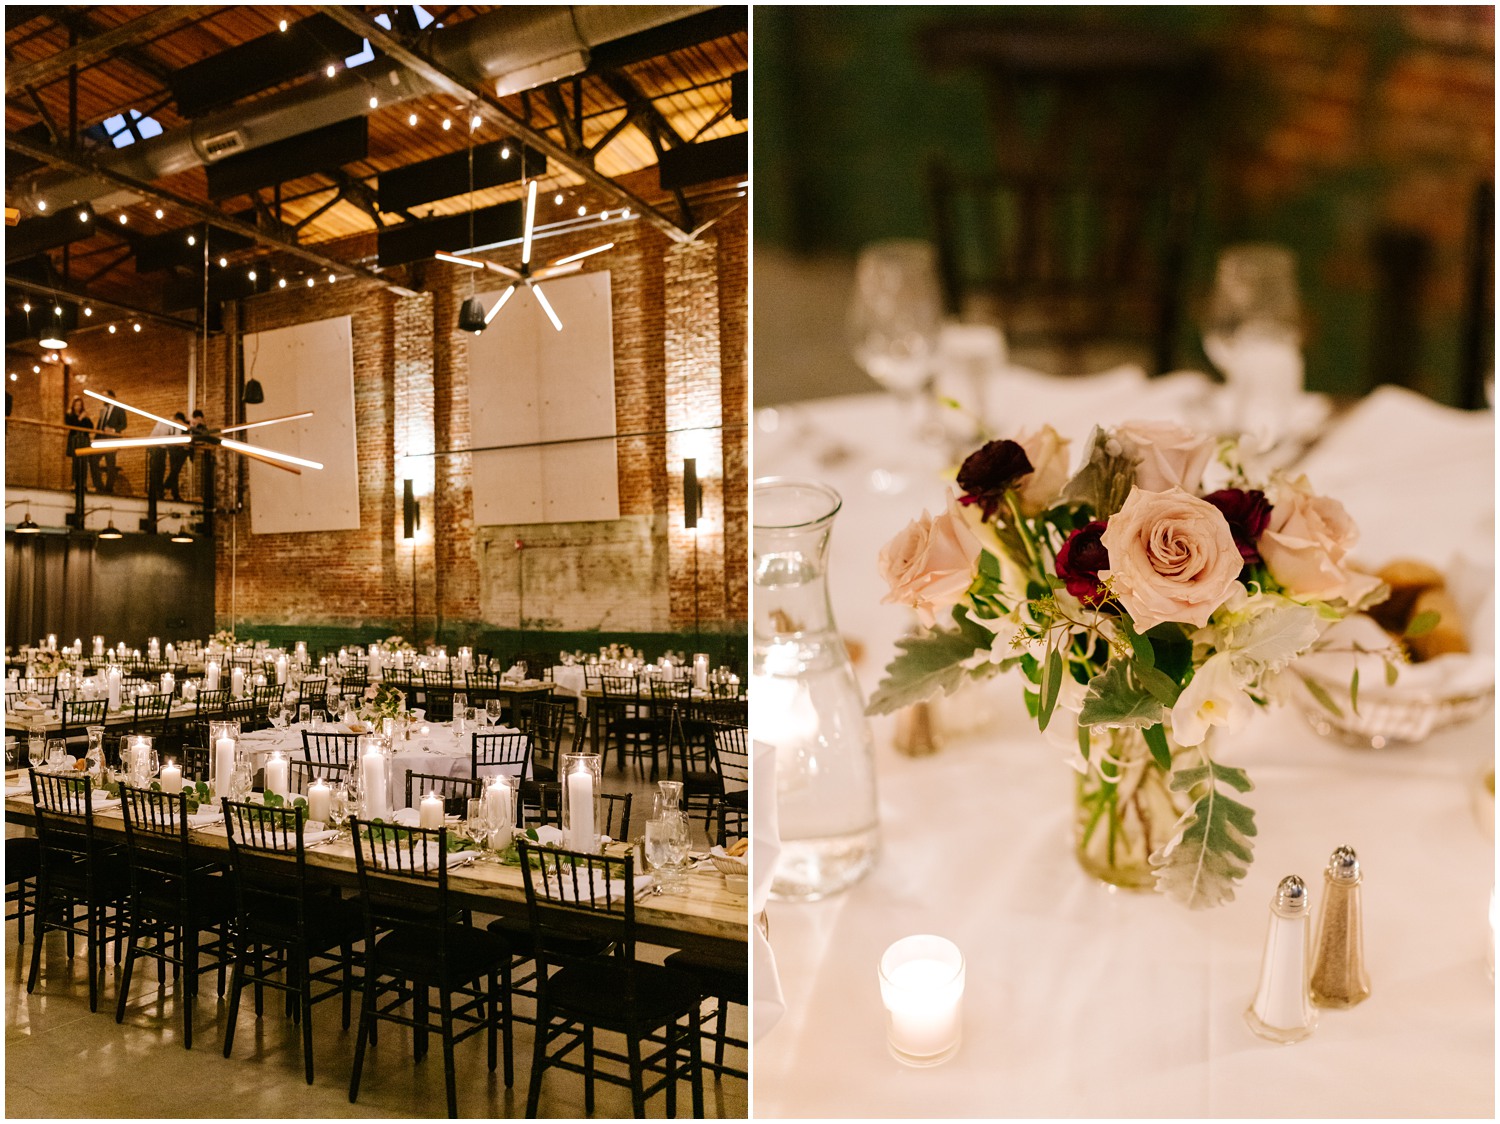 wedding reception with white candle and rose centerpieces photographed by Chelsea Renay Photography